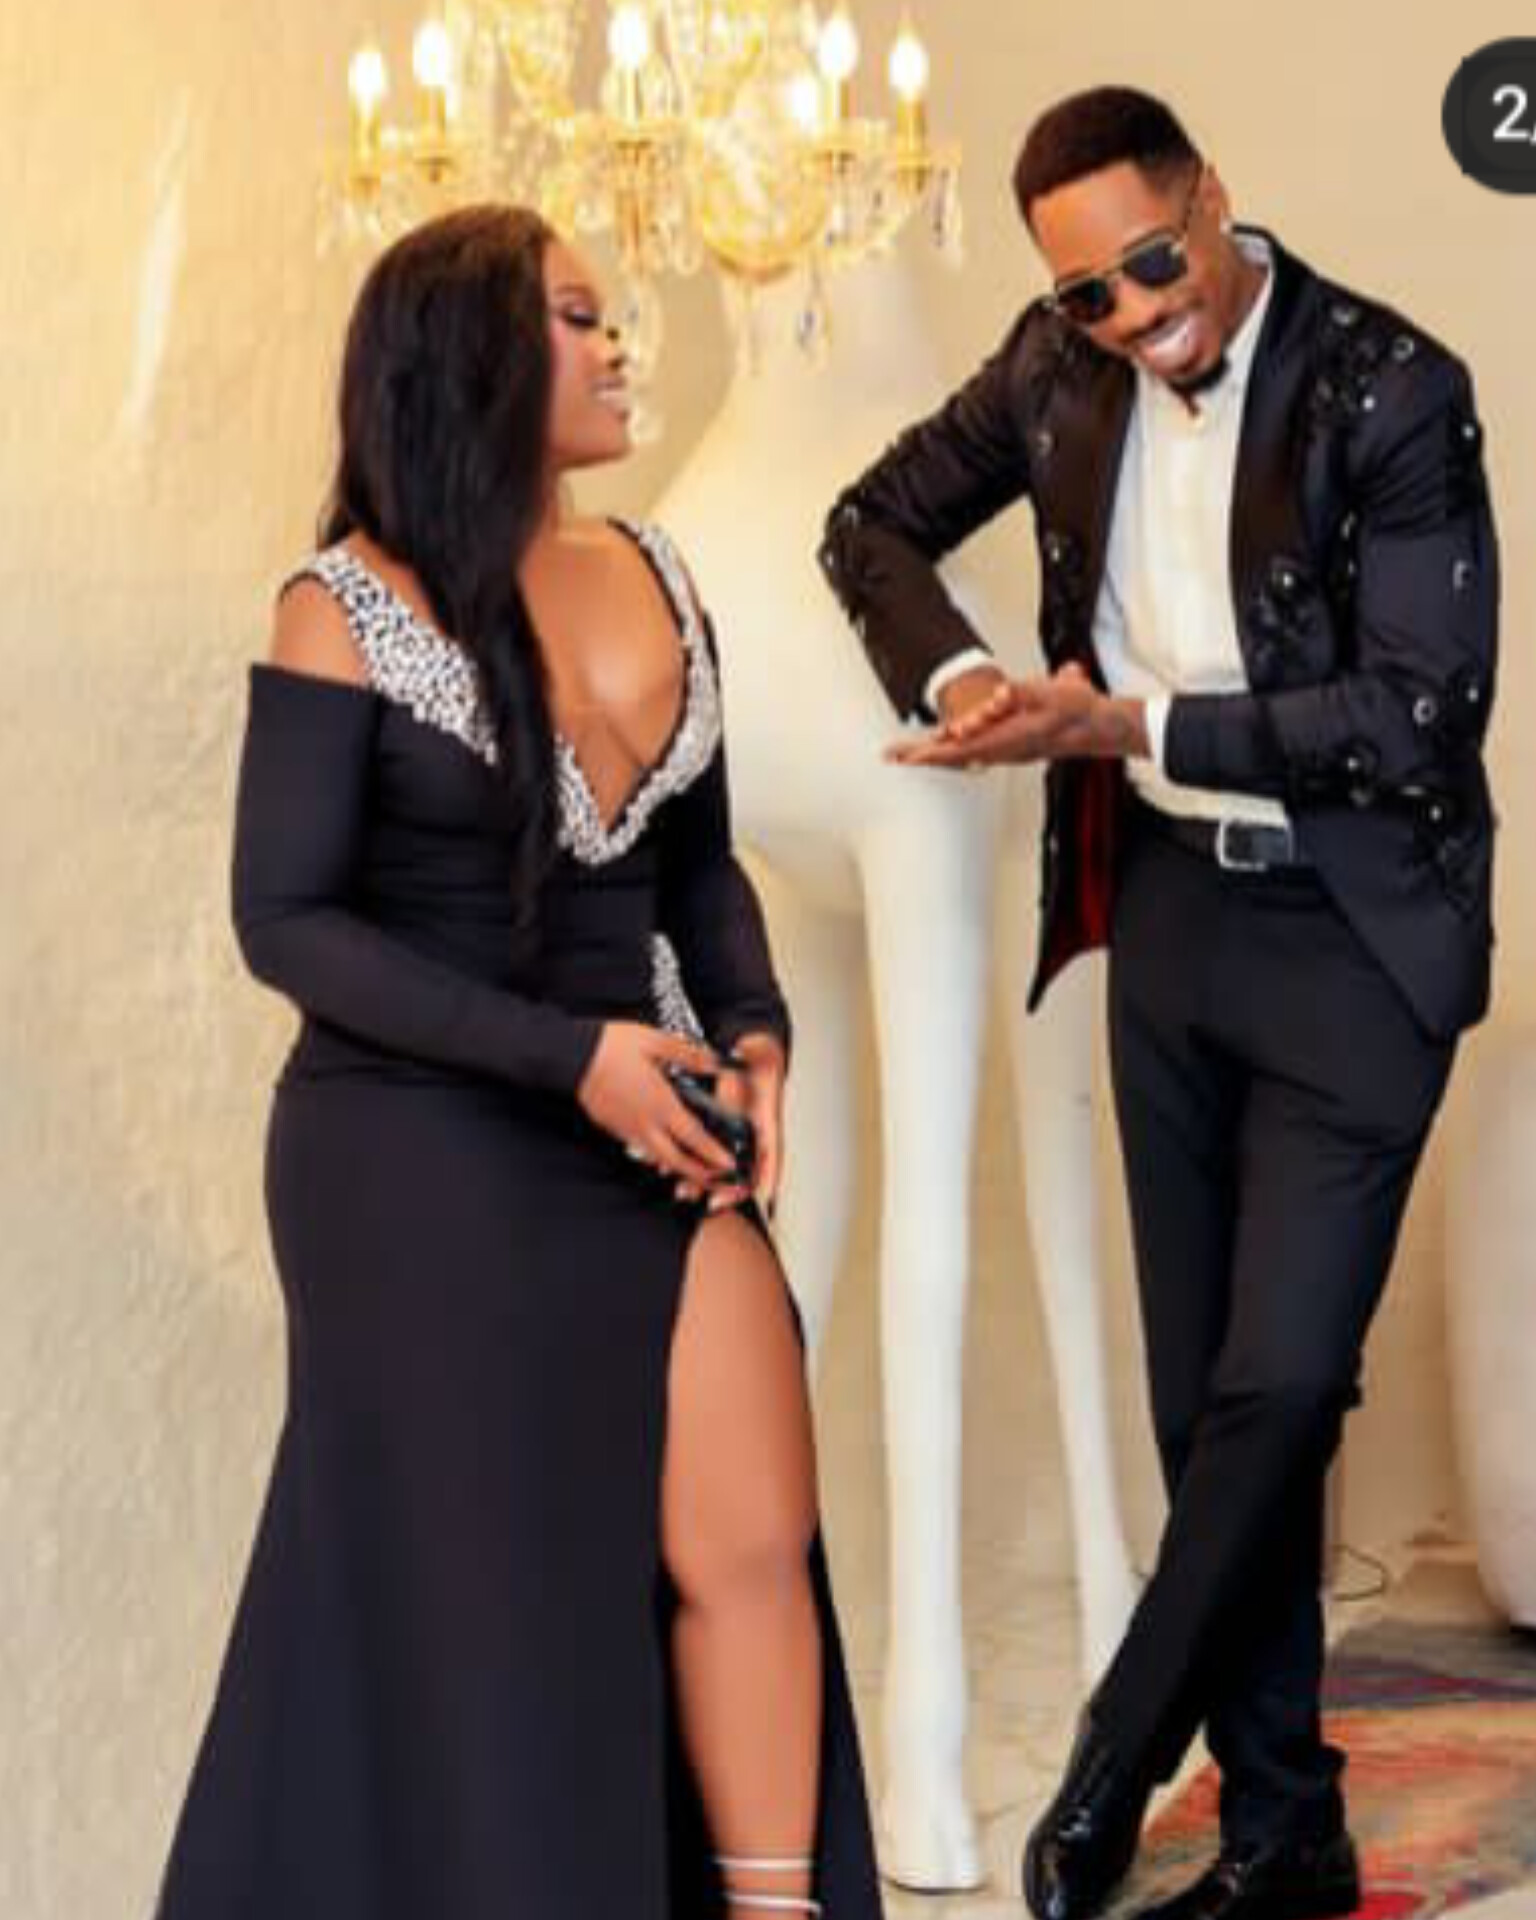 "You Won't Find Loyal And High Quality Women On Dating Apps" – BBNaija Ike Writes As He Shares Picture With Ceec